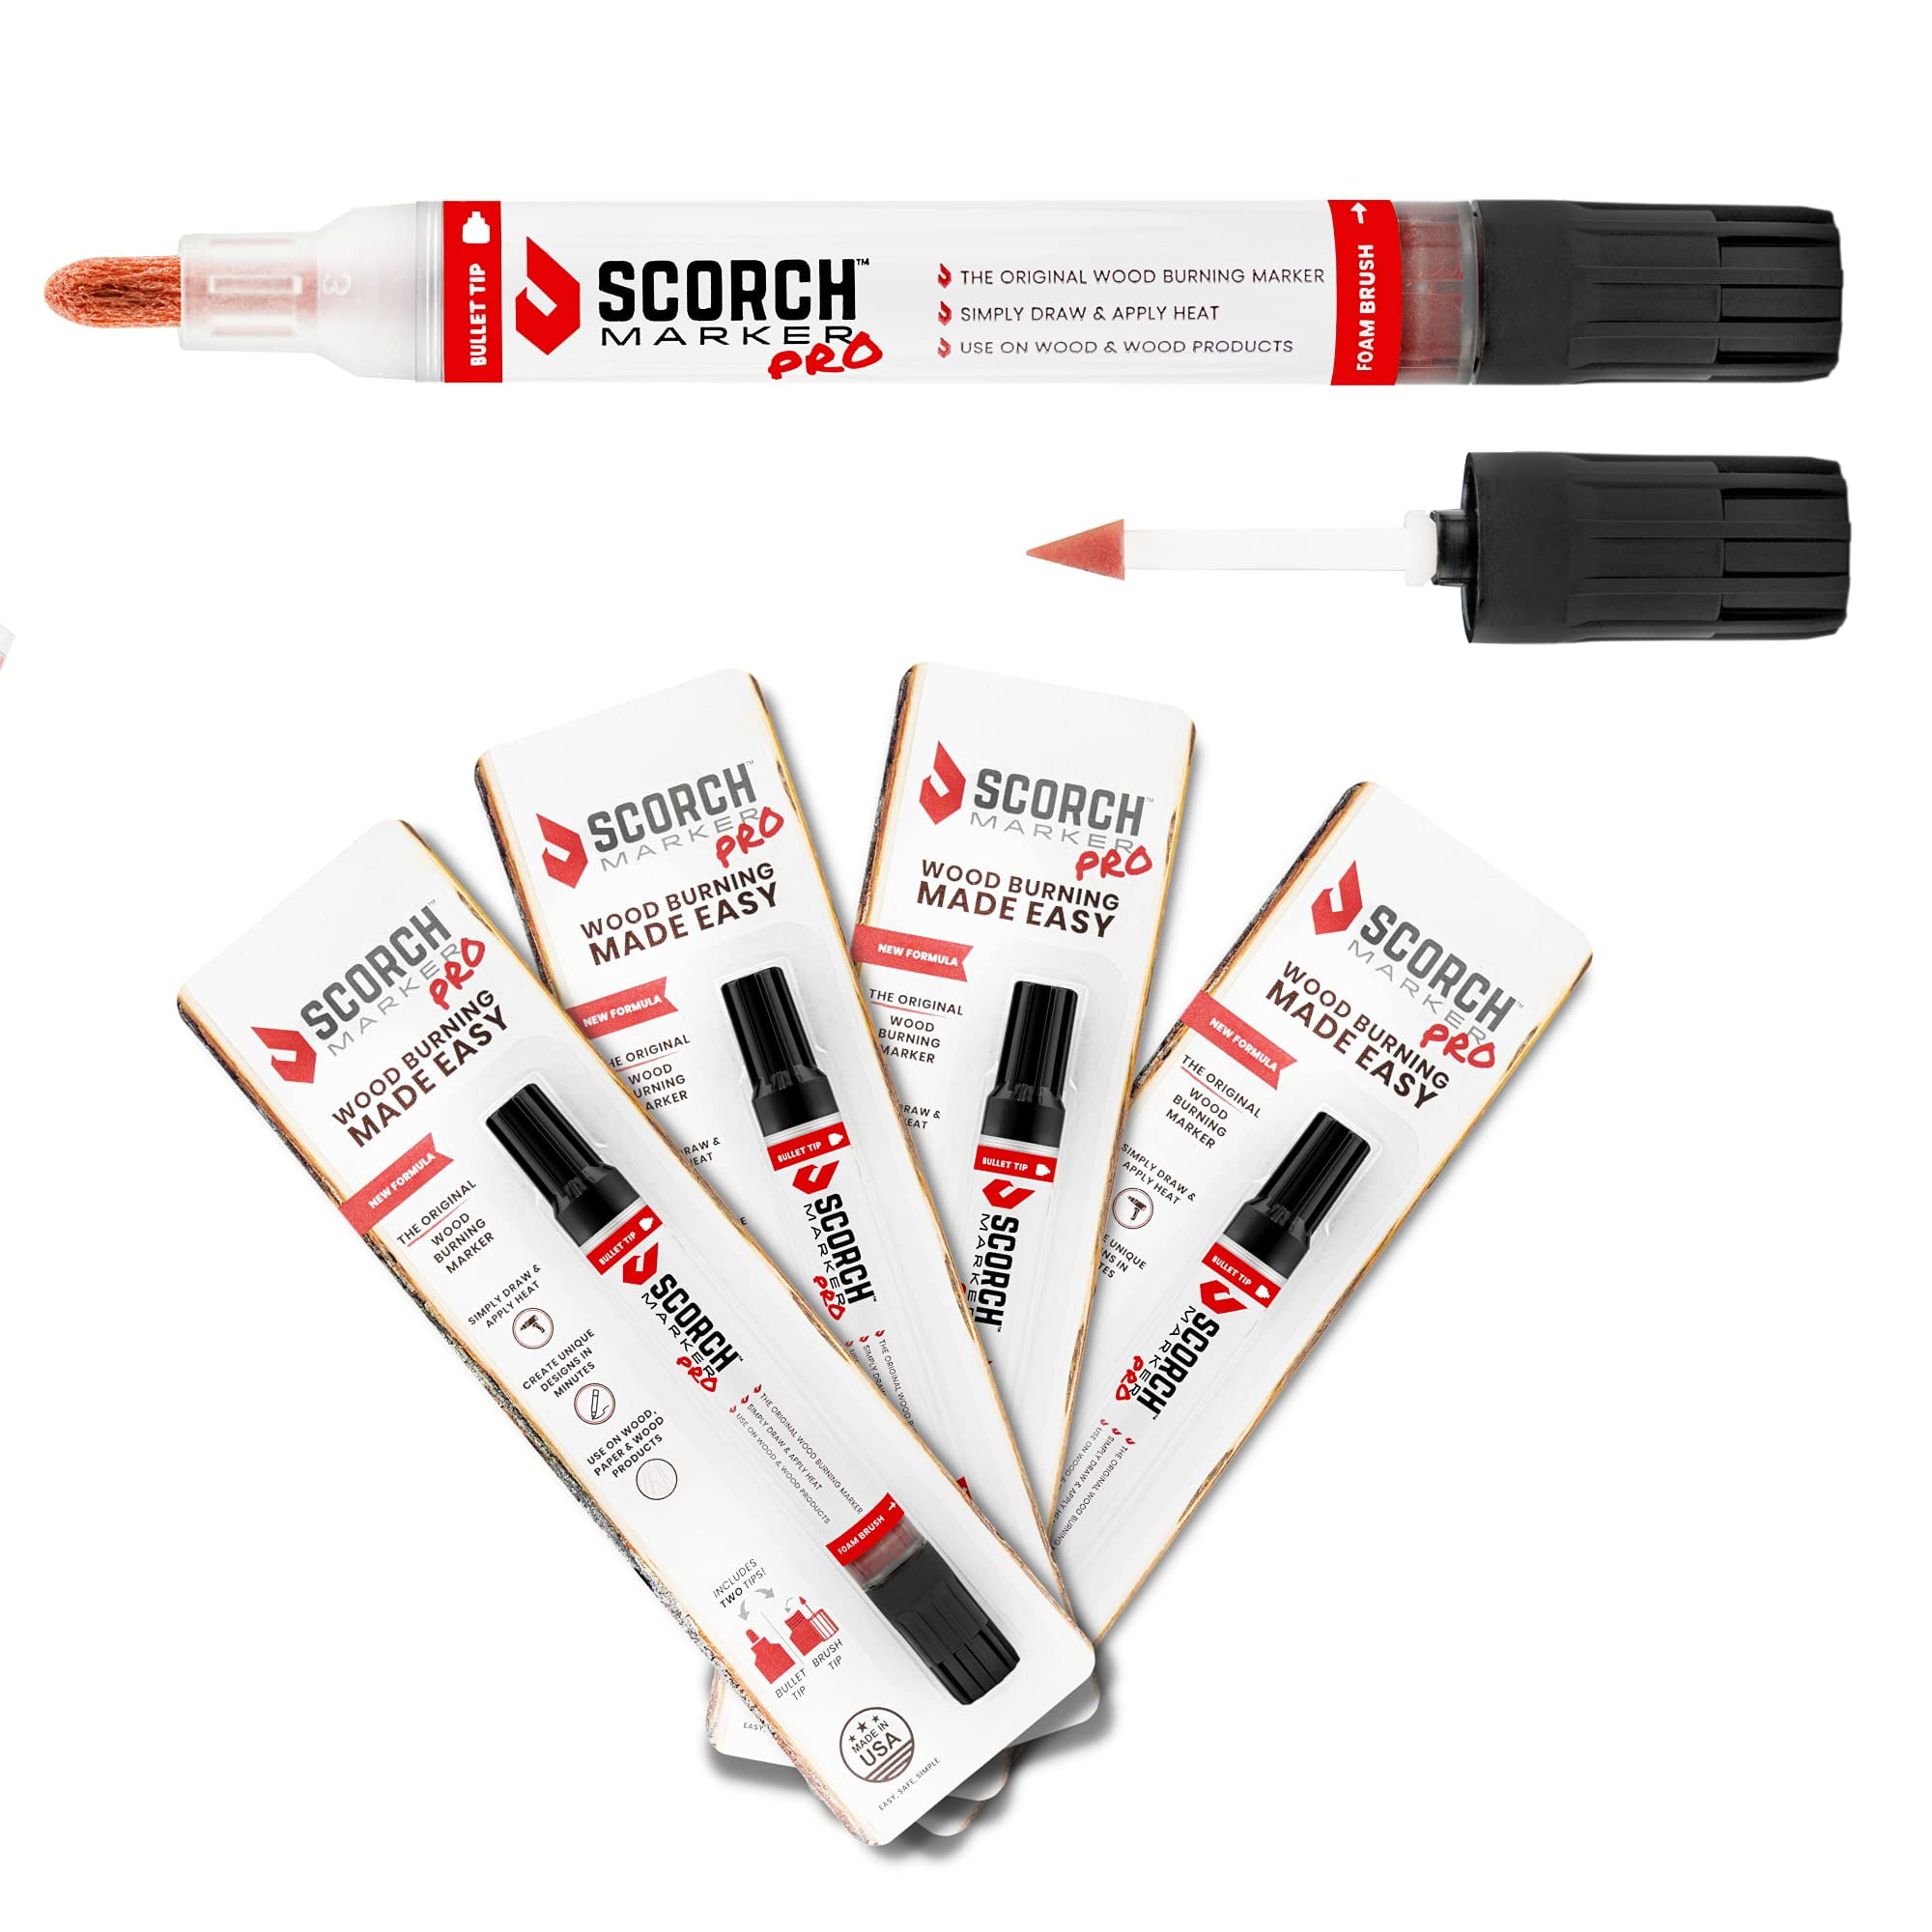 Scorch Marker Pro, Non Toxic Chemical Wood Burning Pen - Heat Sensitive,  Double-Sided Marker for Wood and Crafts - Bullet Tip and Foam Brush for  Easy Application - New Improved Formula (5